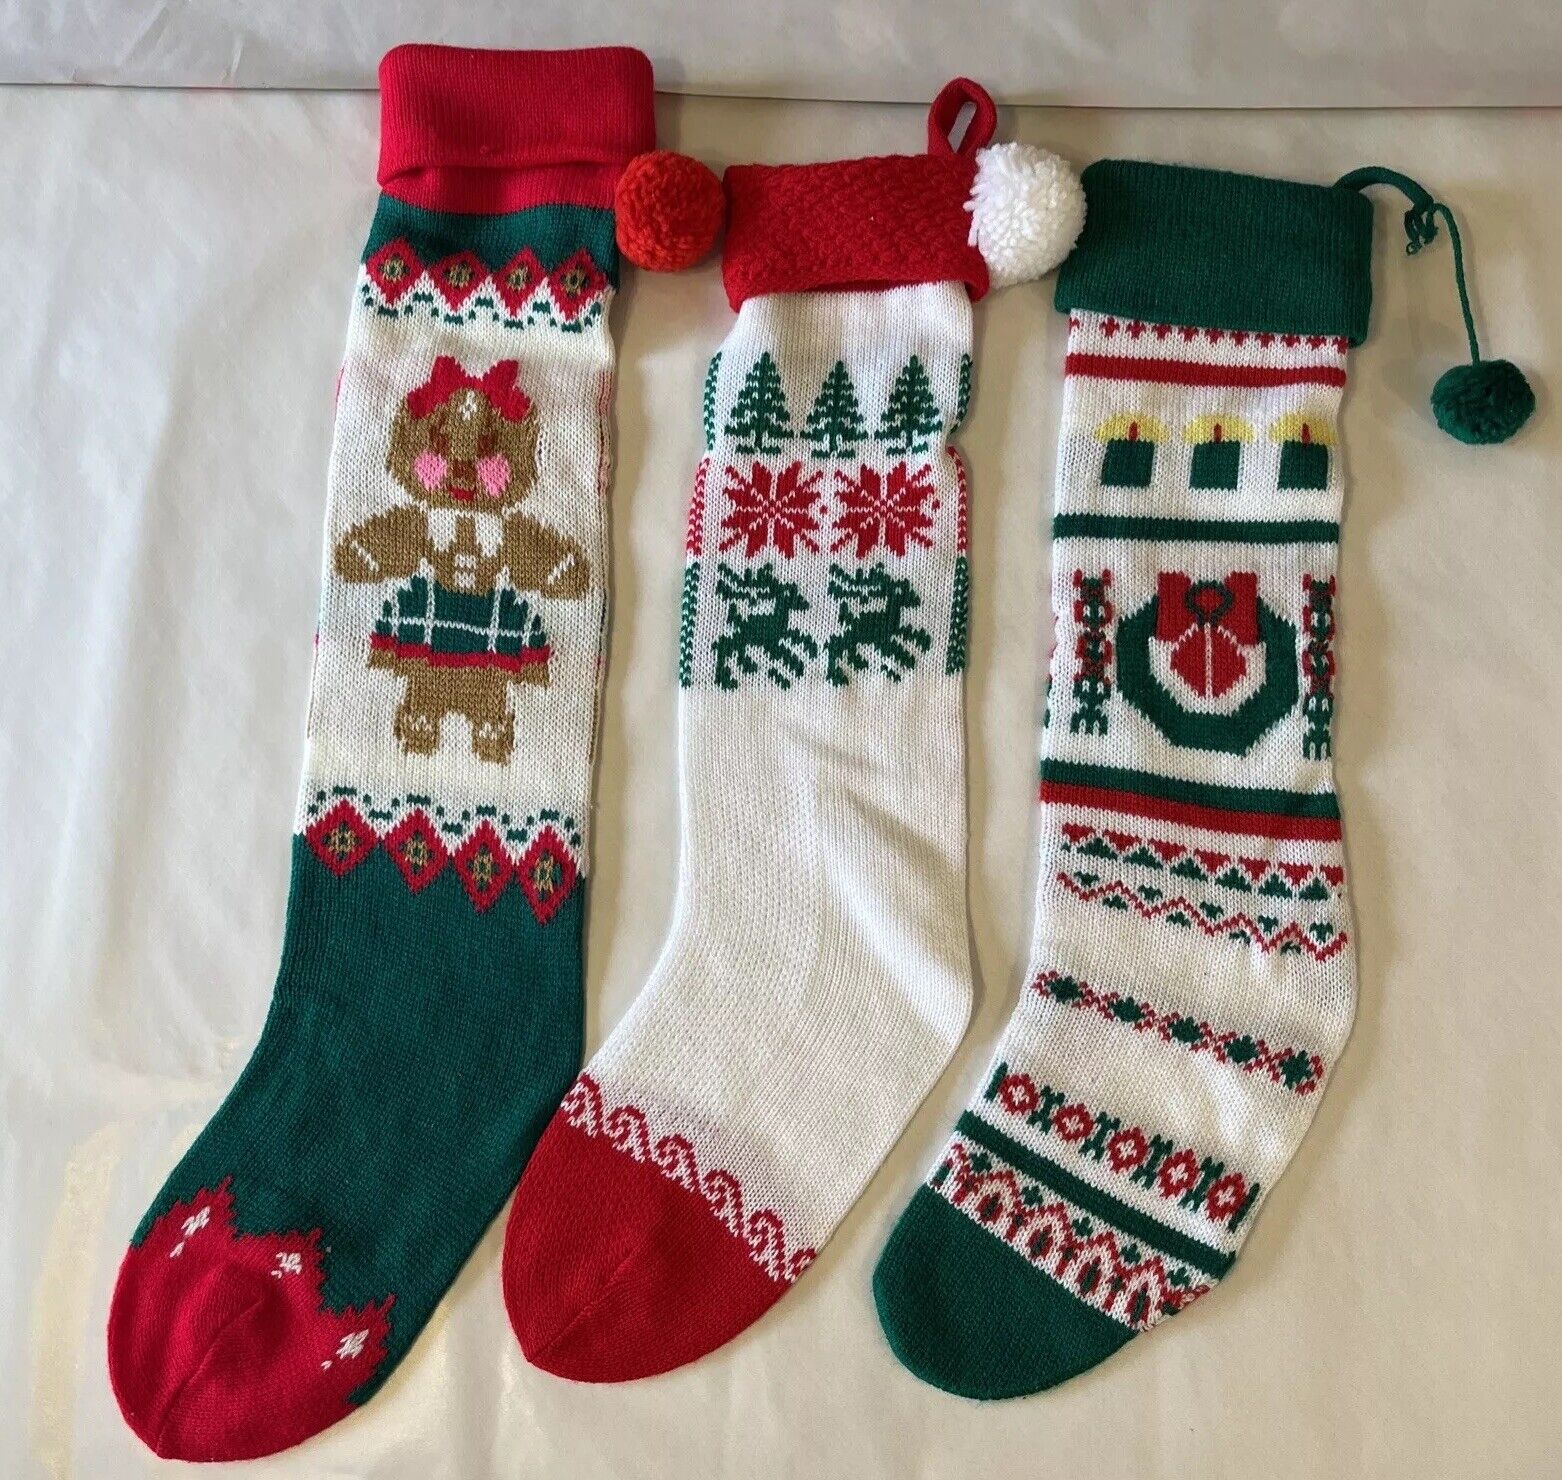 3 Vintage 1980s Acrylic  Christmas Stocking 3 Different Designs